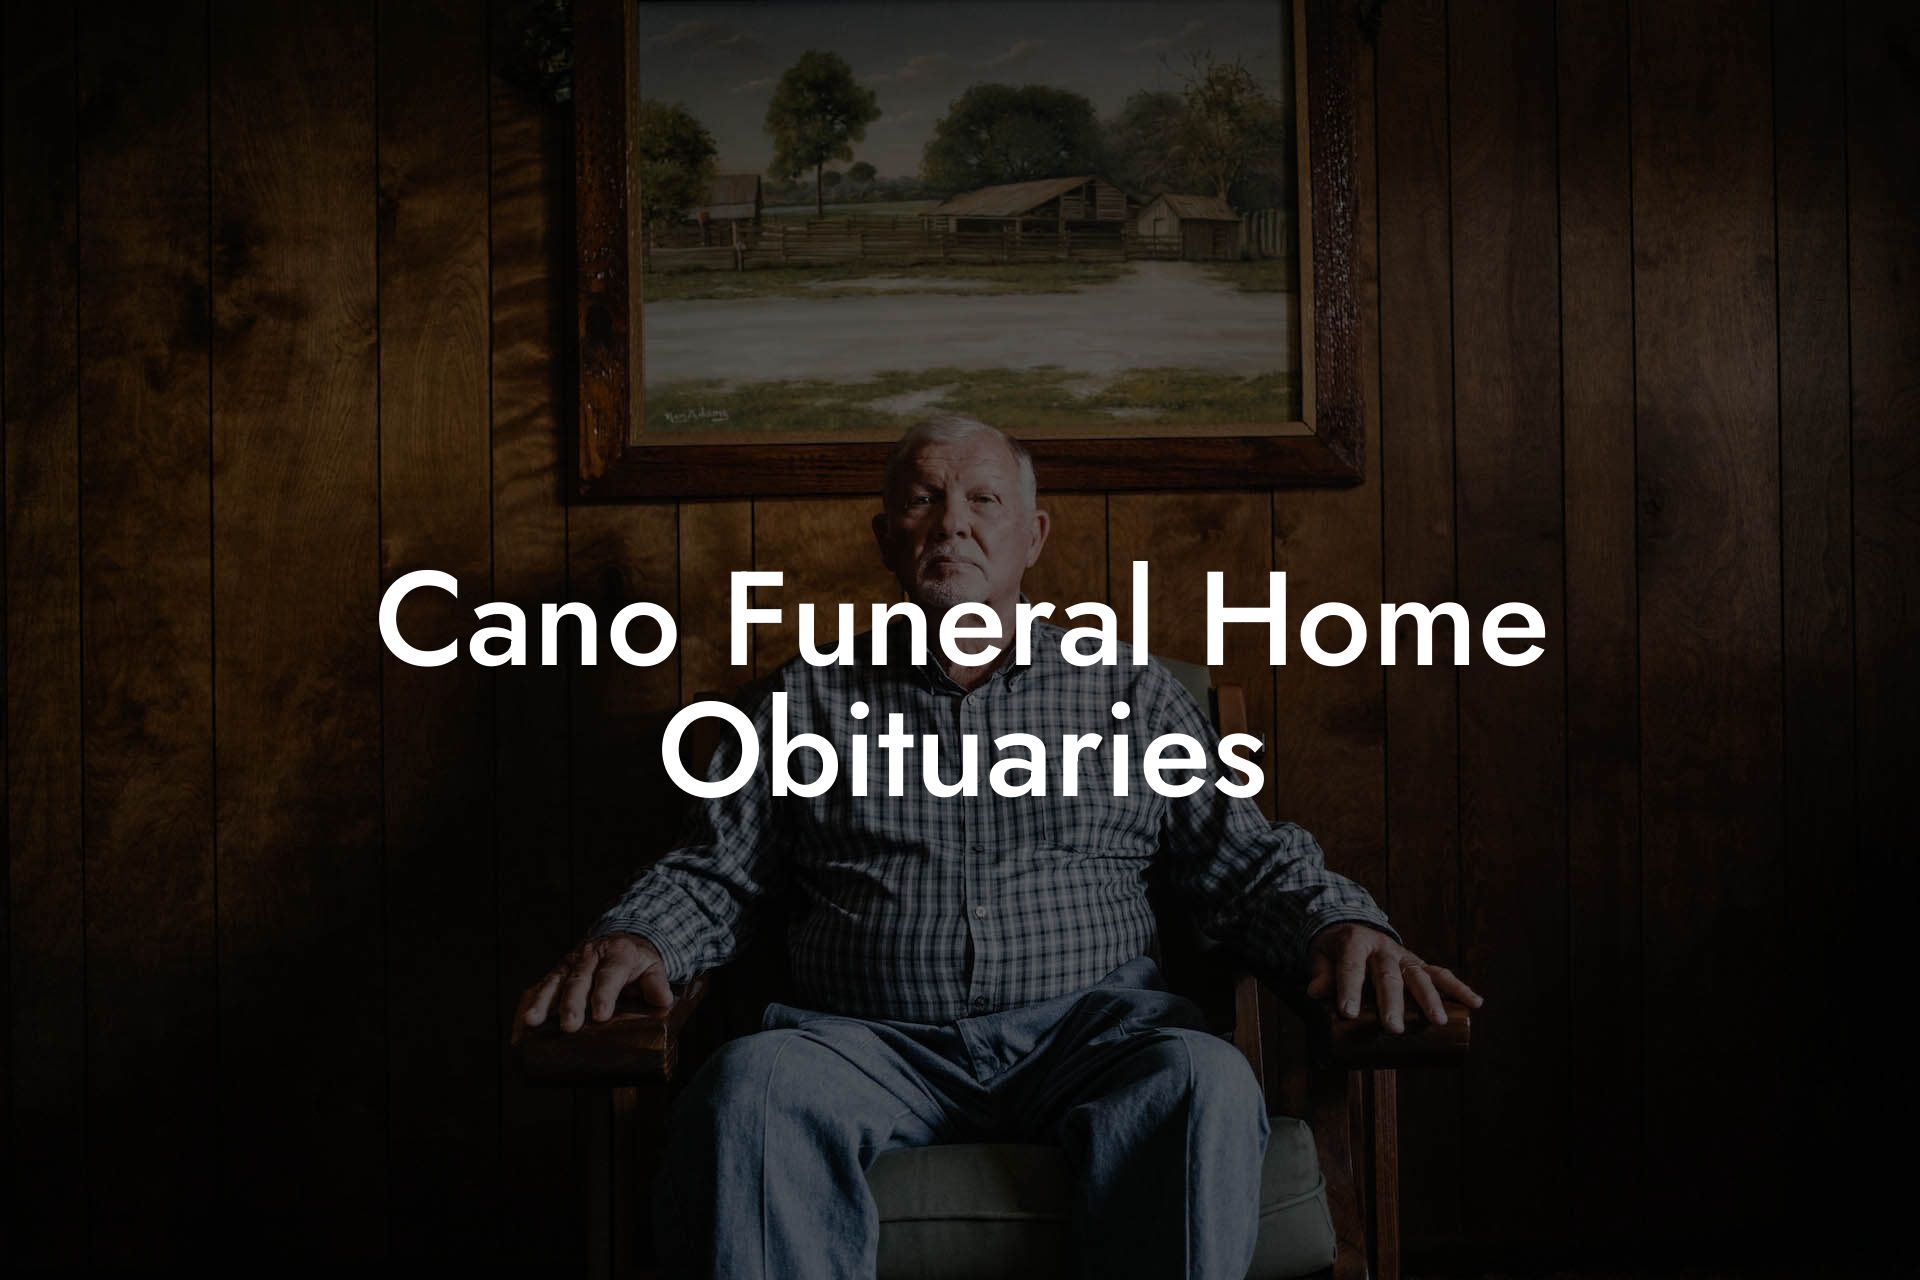 Cano Funeral Home Obituaries